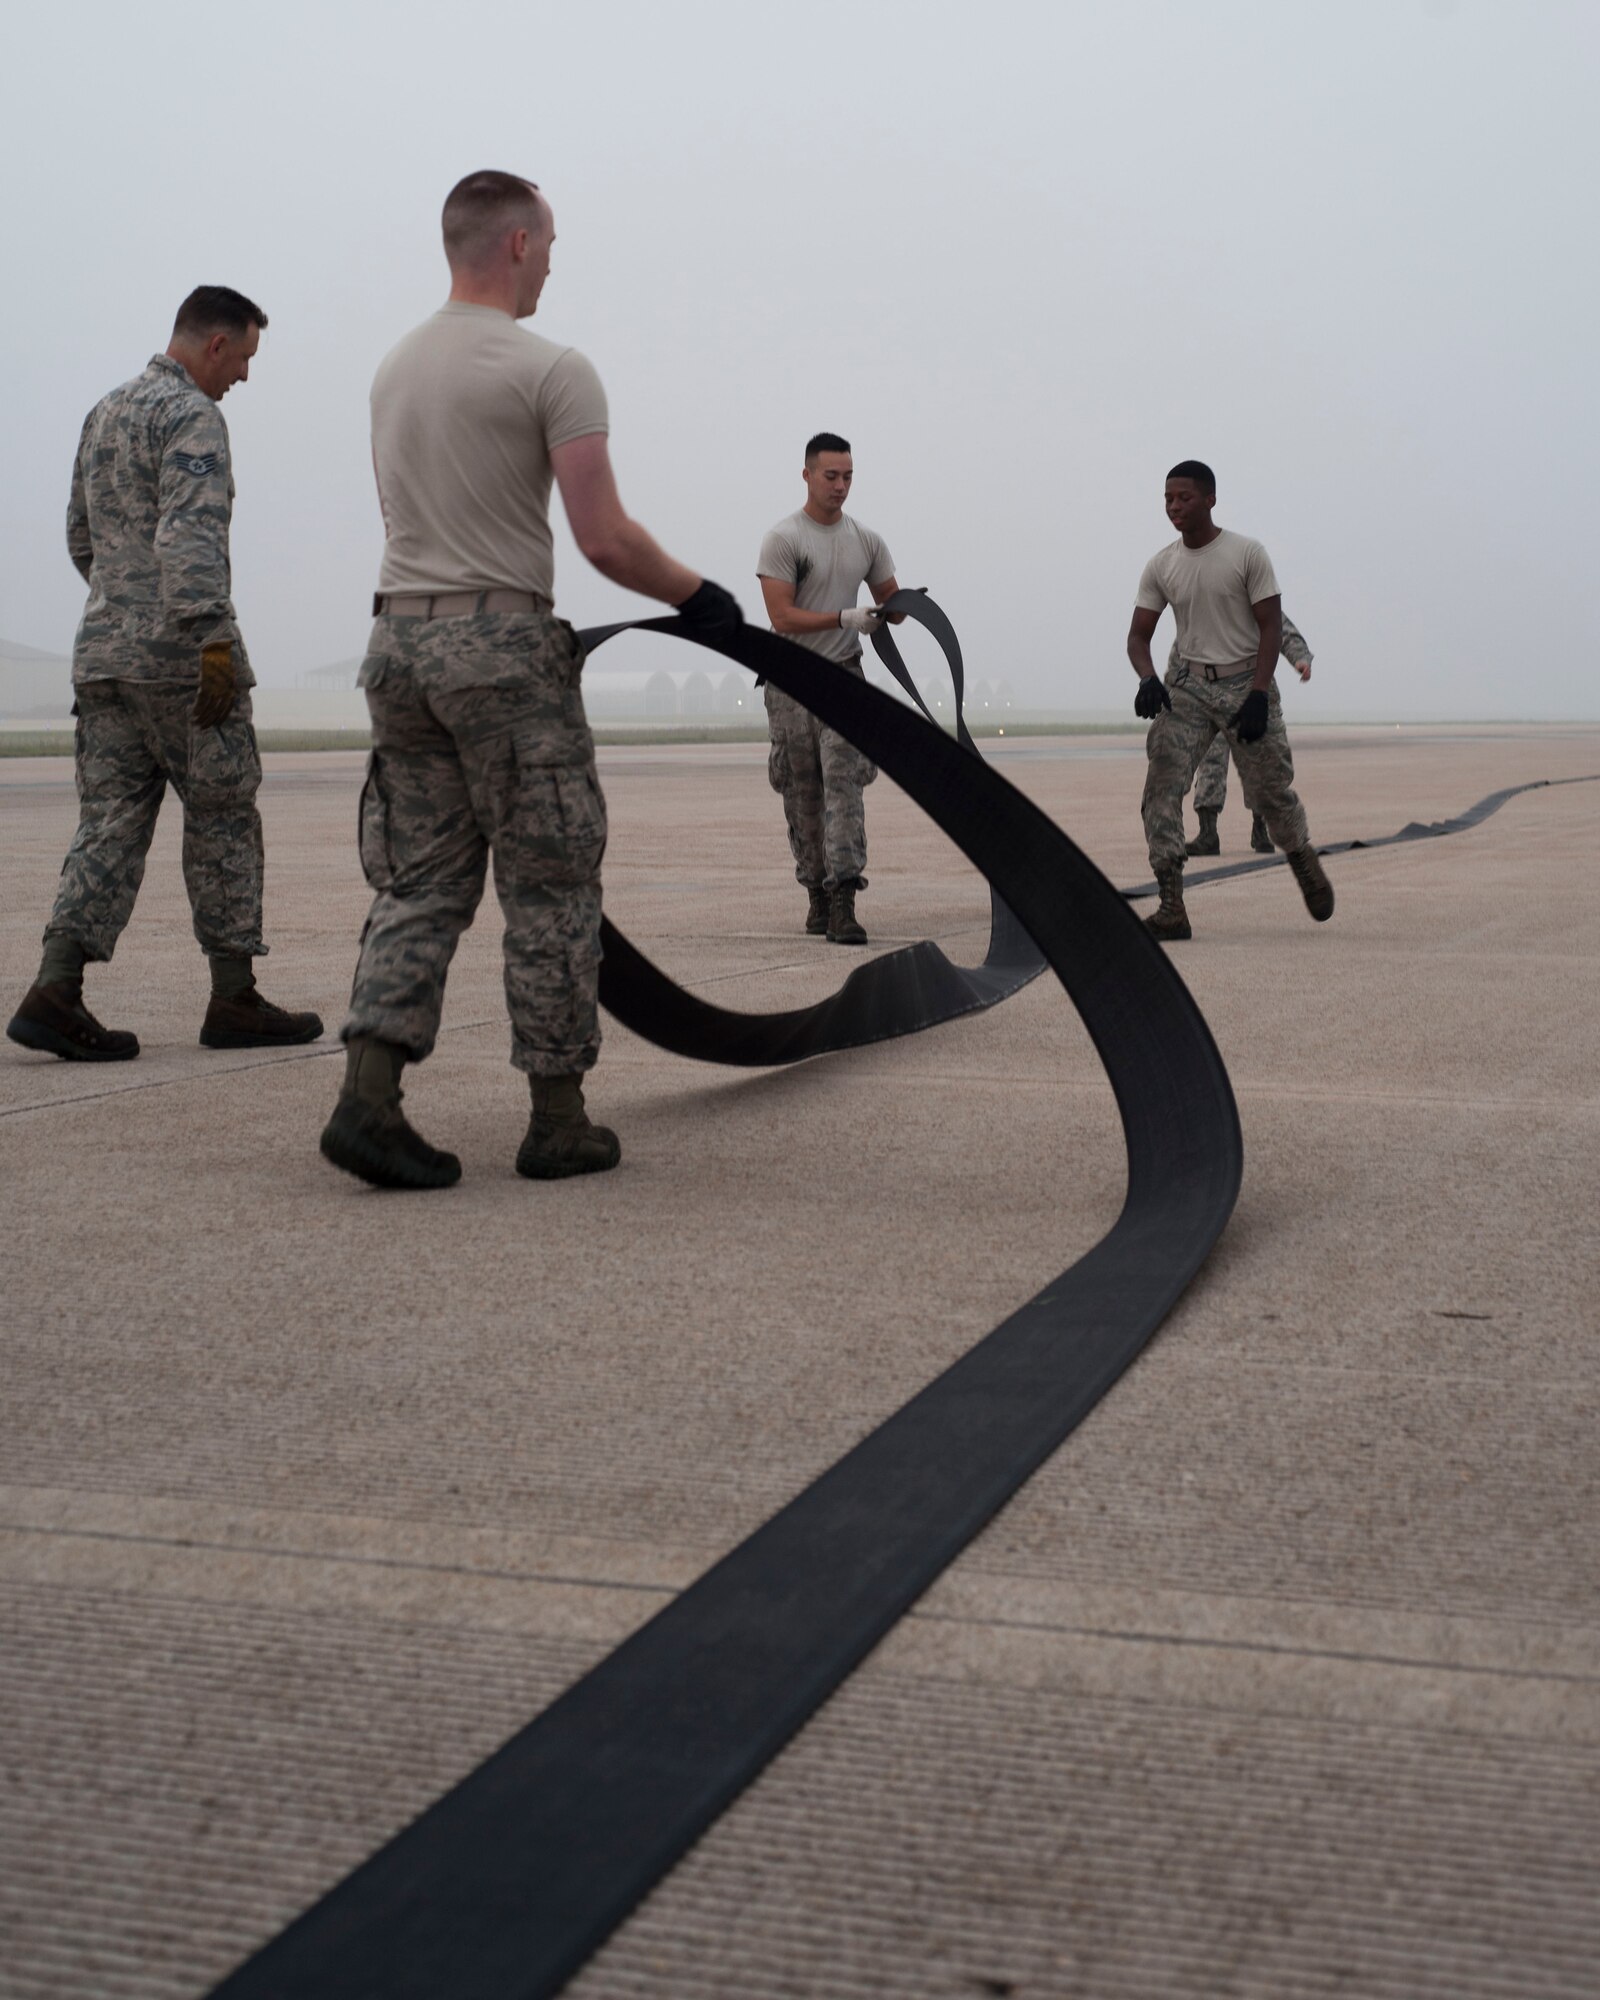 U.S. Air Force Airmen assigned to the 8th Civil Engineer Squadron perform maintenance by extending and flipping the barrier tape on the aircraft arresting system at Kunsan Air Base, Republic of Korea, Sept. 9, 2017. The nylon tape that is used has a lifespan of approximately four years, but needs to be flipped every two years due to normal wear and tear. Civil Engineers perform this maintenance to prevent the tape from improperly snapping and potentially causing severe damage to the aircraft in the event of an in-flight emergency. (U.S. Air Force photo by Staff Sgt. Victoria H. Taylor)